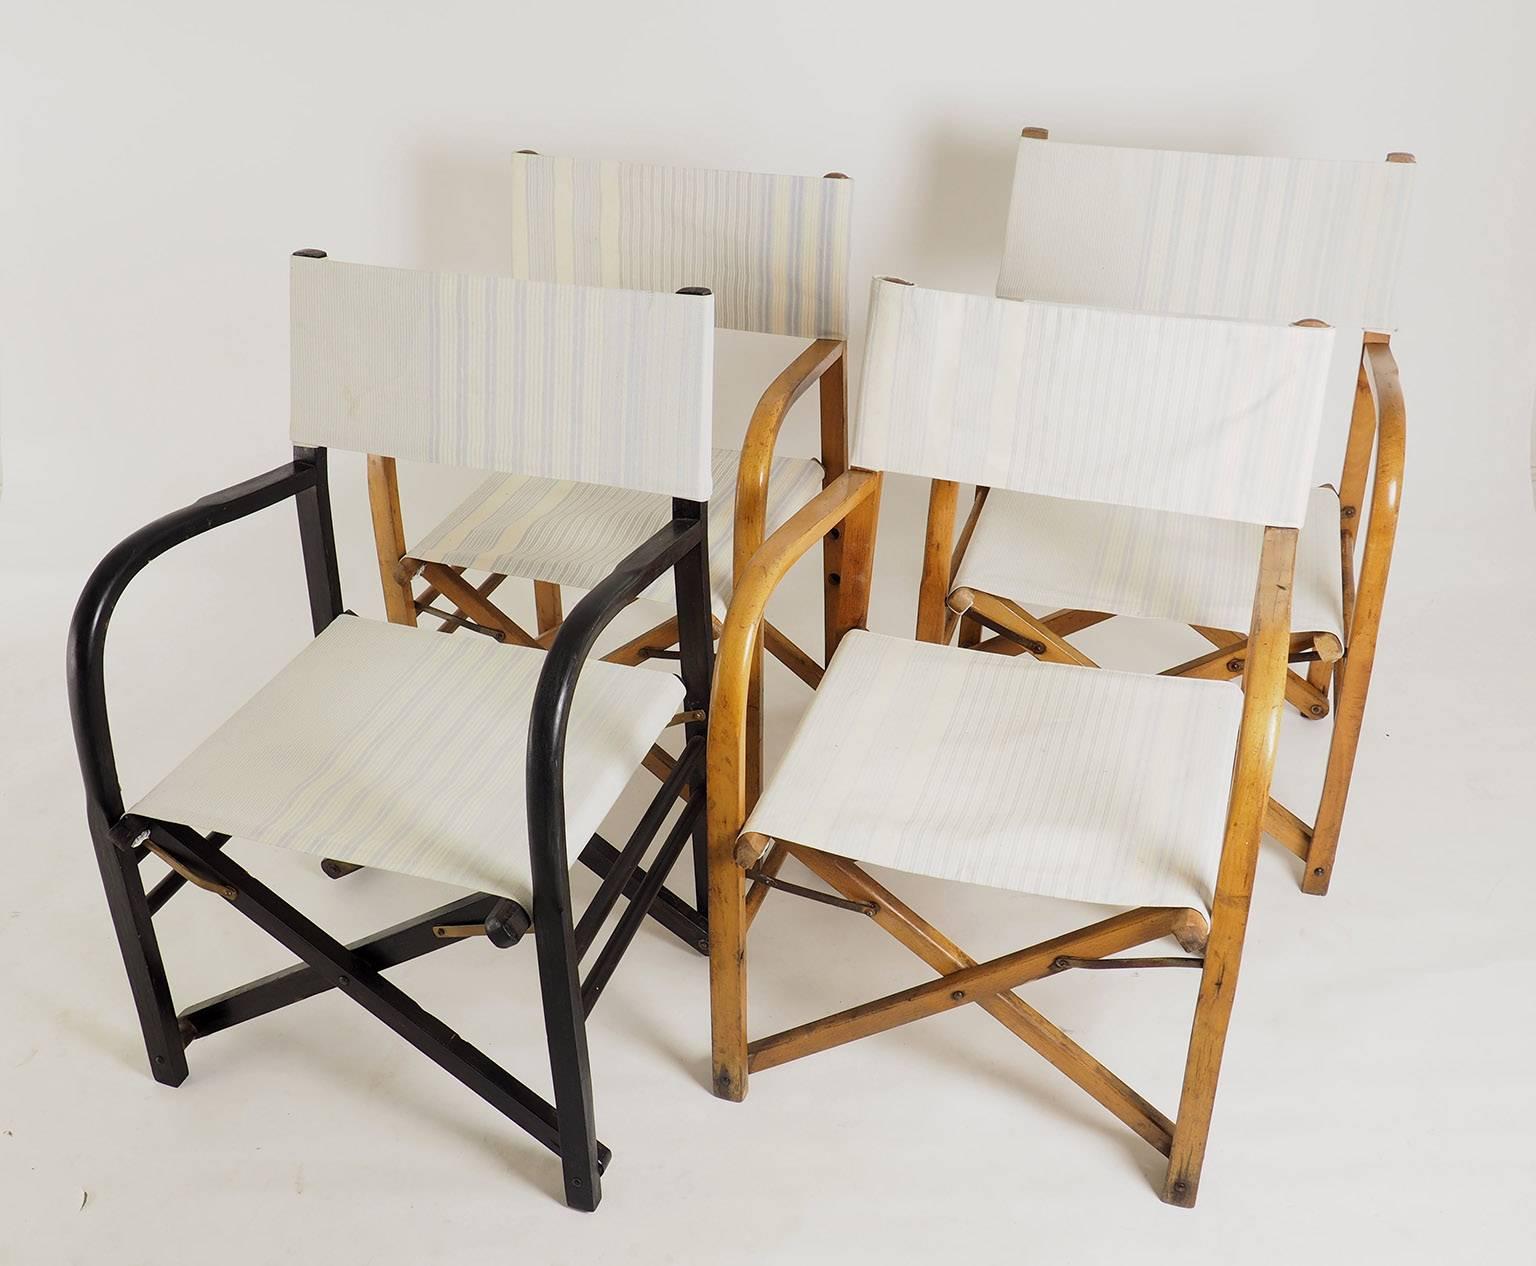 Set of four early folding Director's chairs from 1940s with strong cotton fabric. The set of four includes: three chairs in natural wood and one in black lacquered wood. Very original shape with large arms.